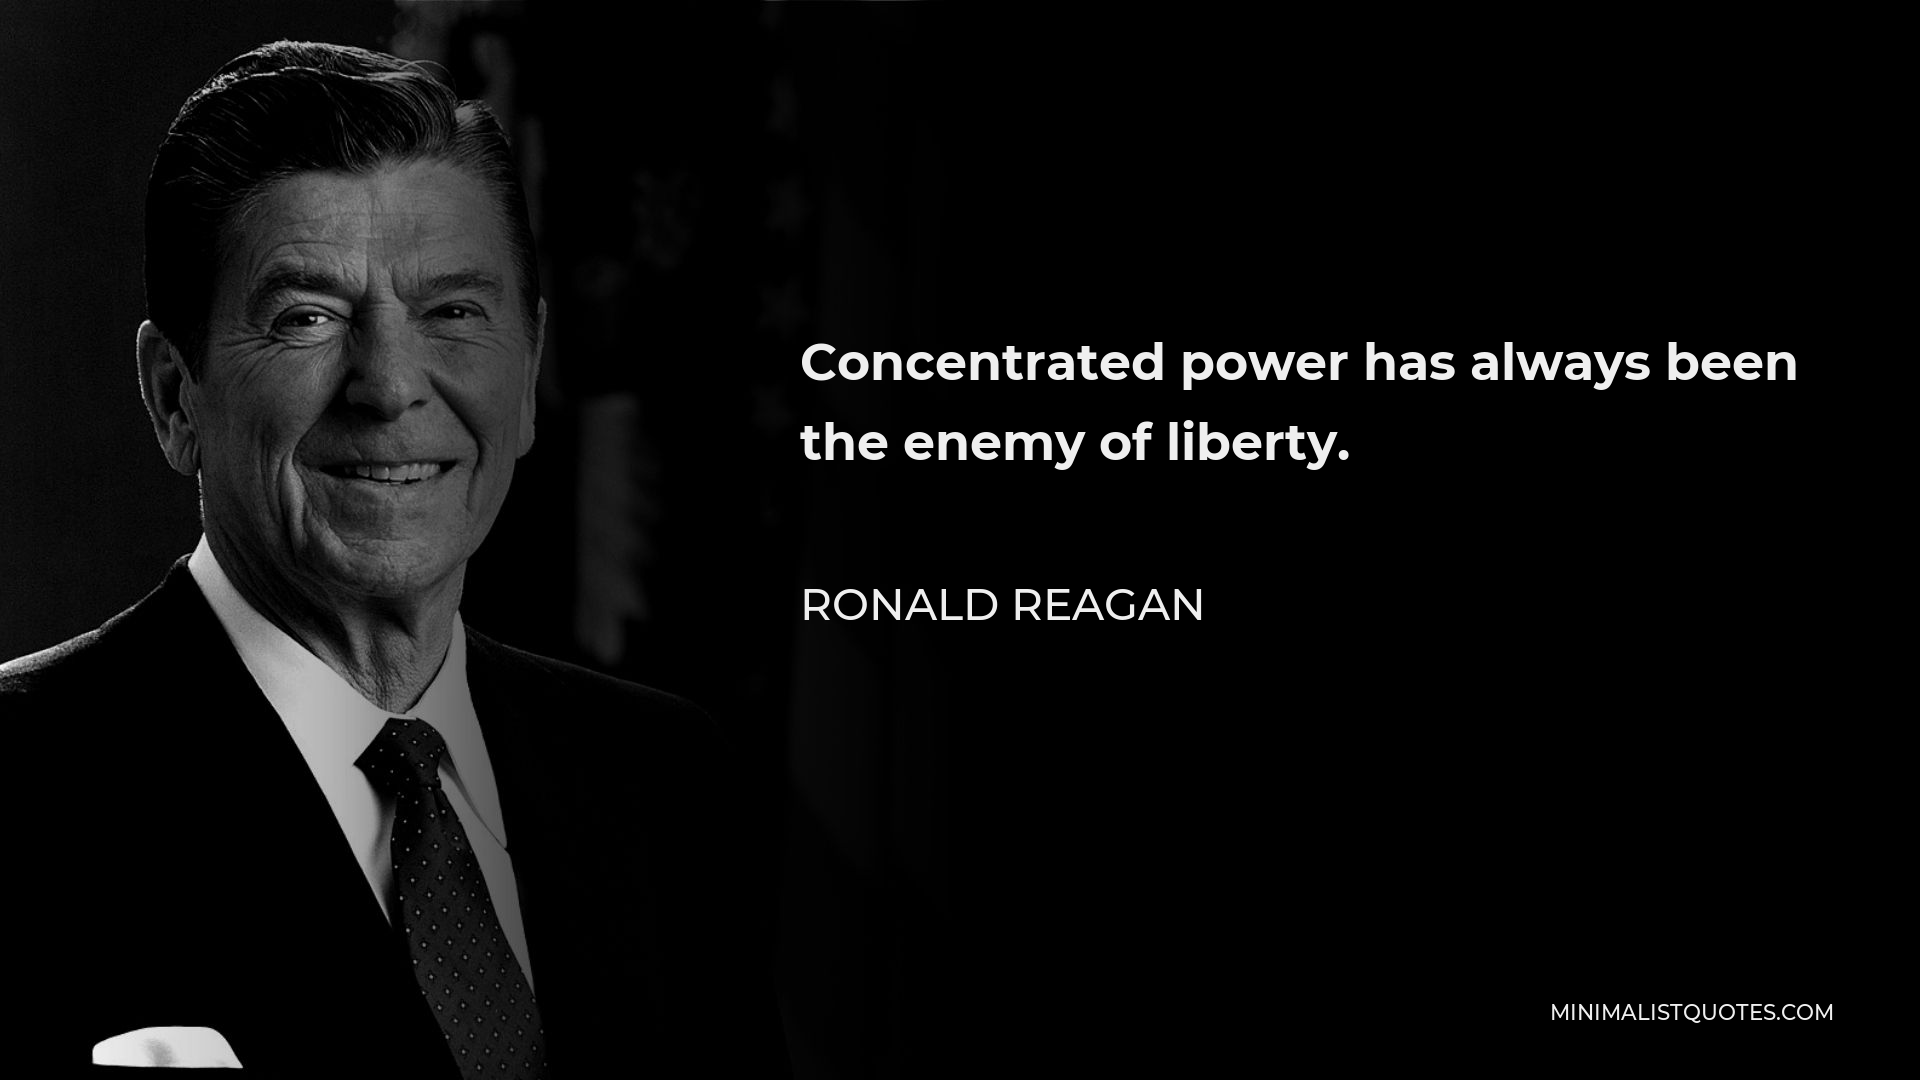 Ronald Reagan Quote - Concentrated power has always been the enemy of liberty.